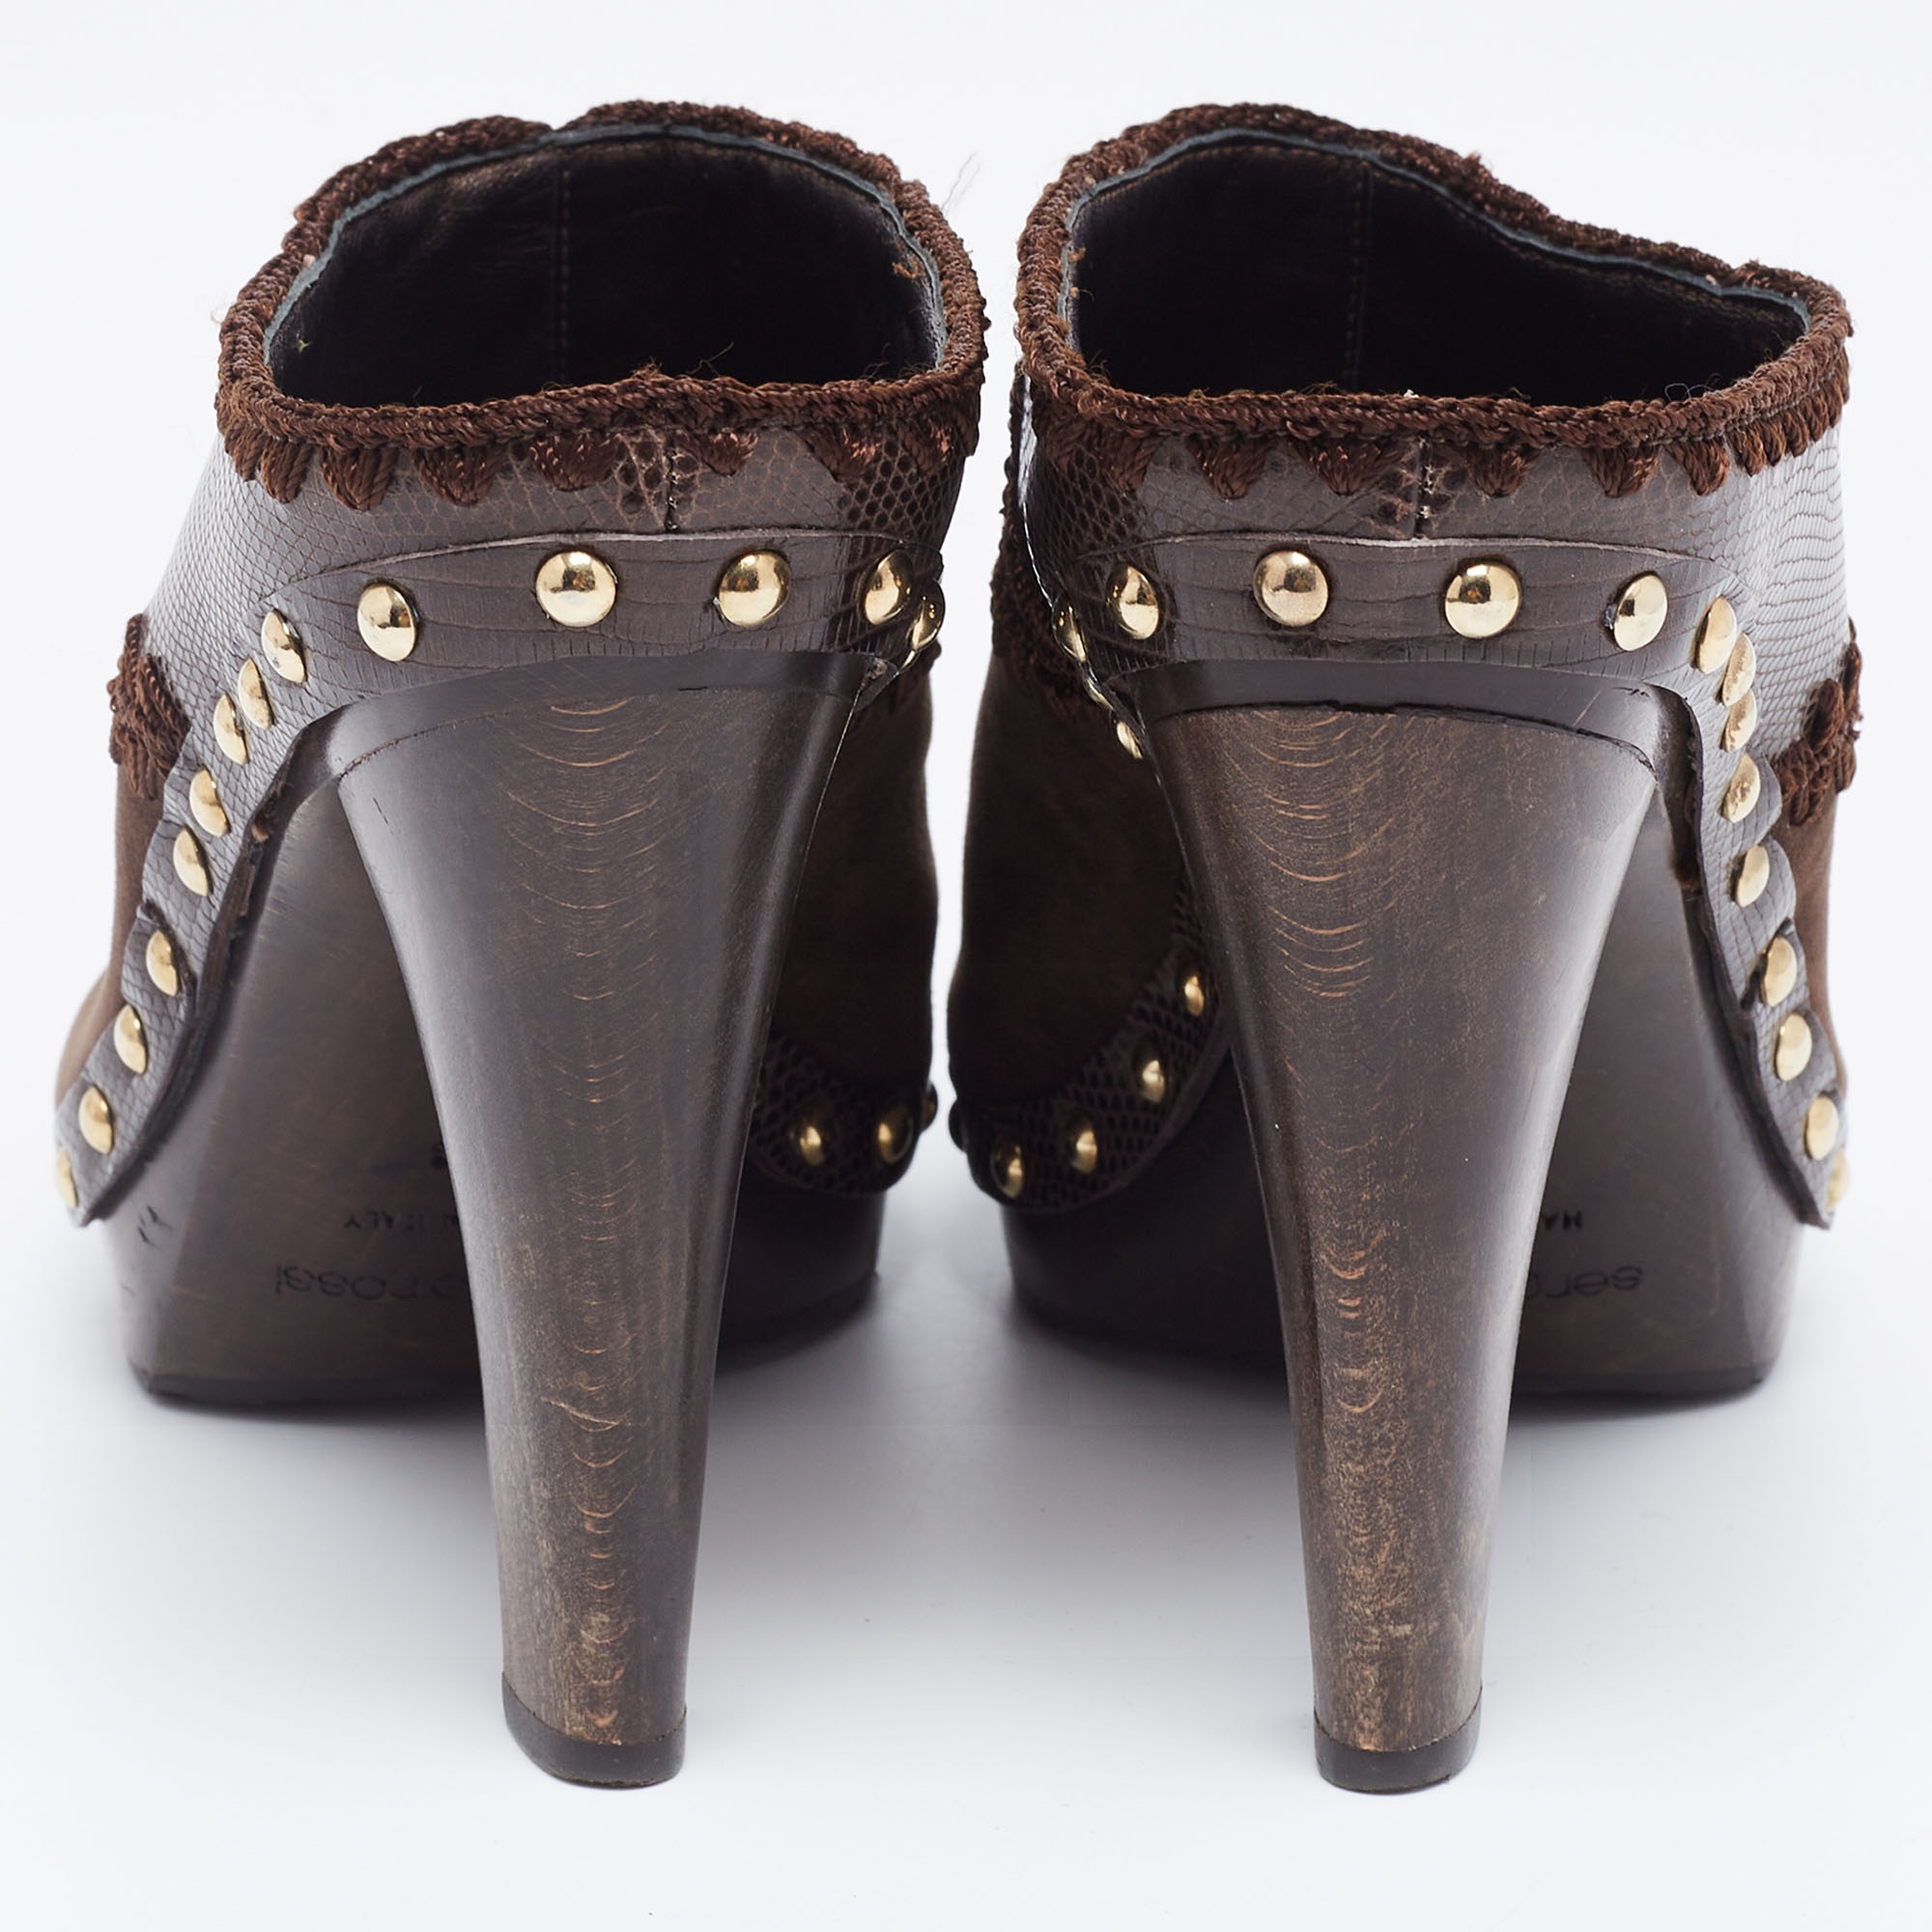 Sergio Rossi Brown Lizard Embossed Leather And Suede Studded Platform Mules Size 38